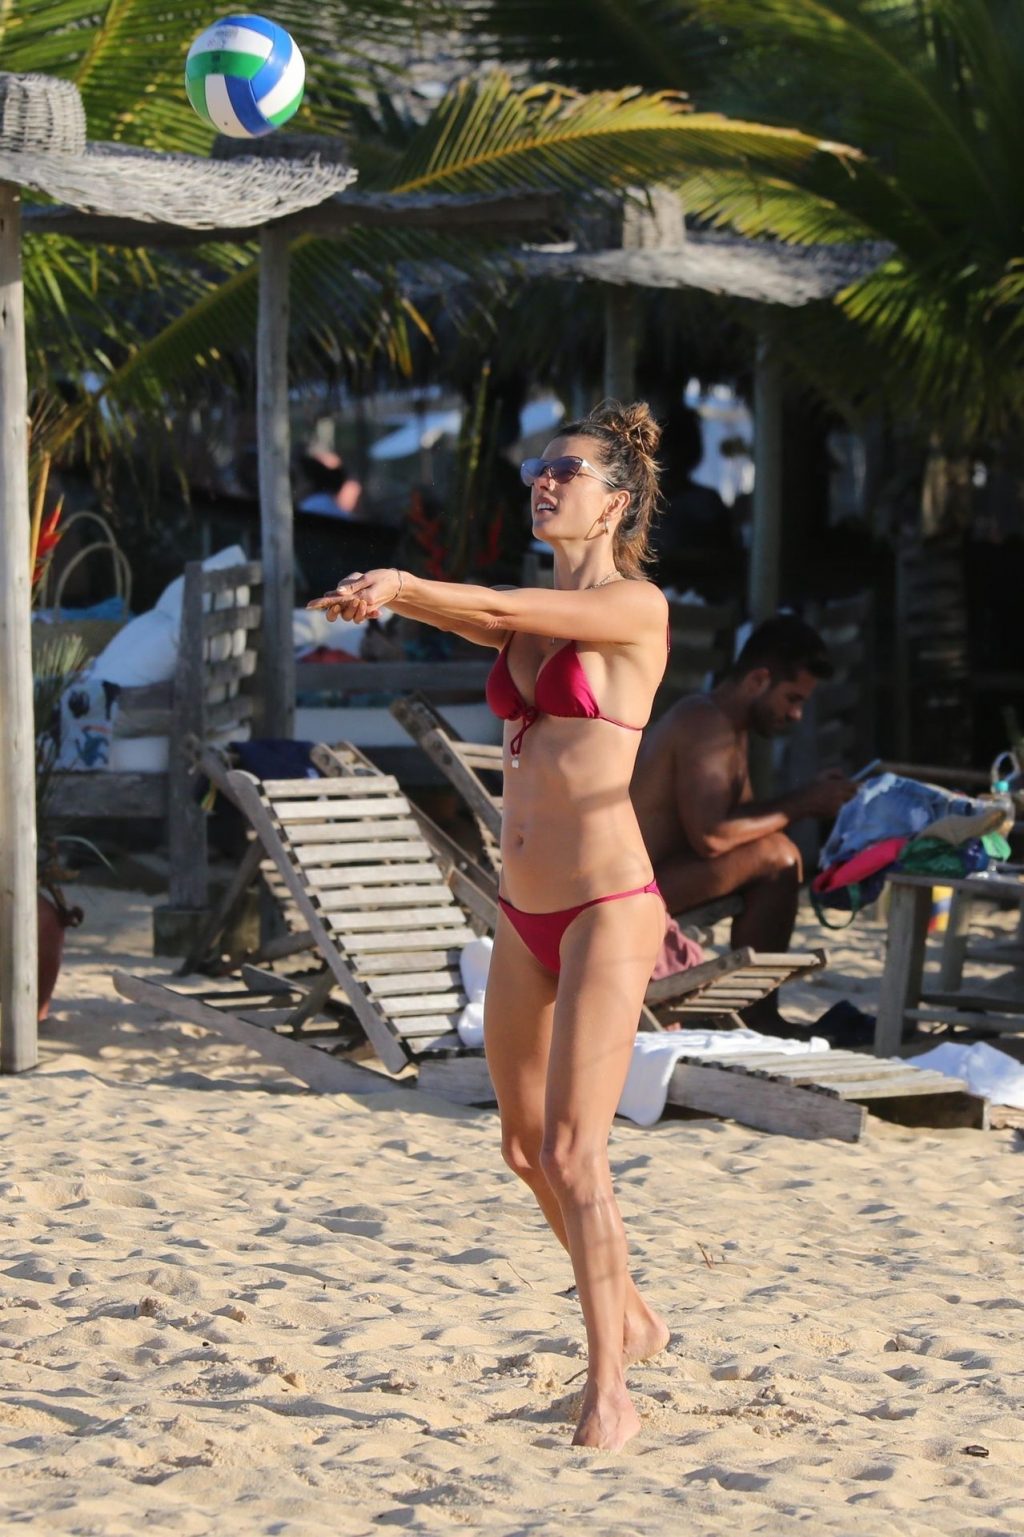 Alessandra Ambrosio Enjoys a Day with Her Beau on the Beaches of Brazil (111 Photos)